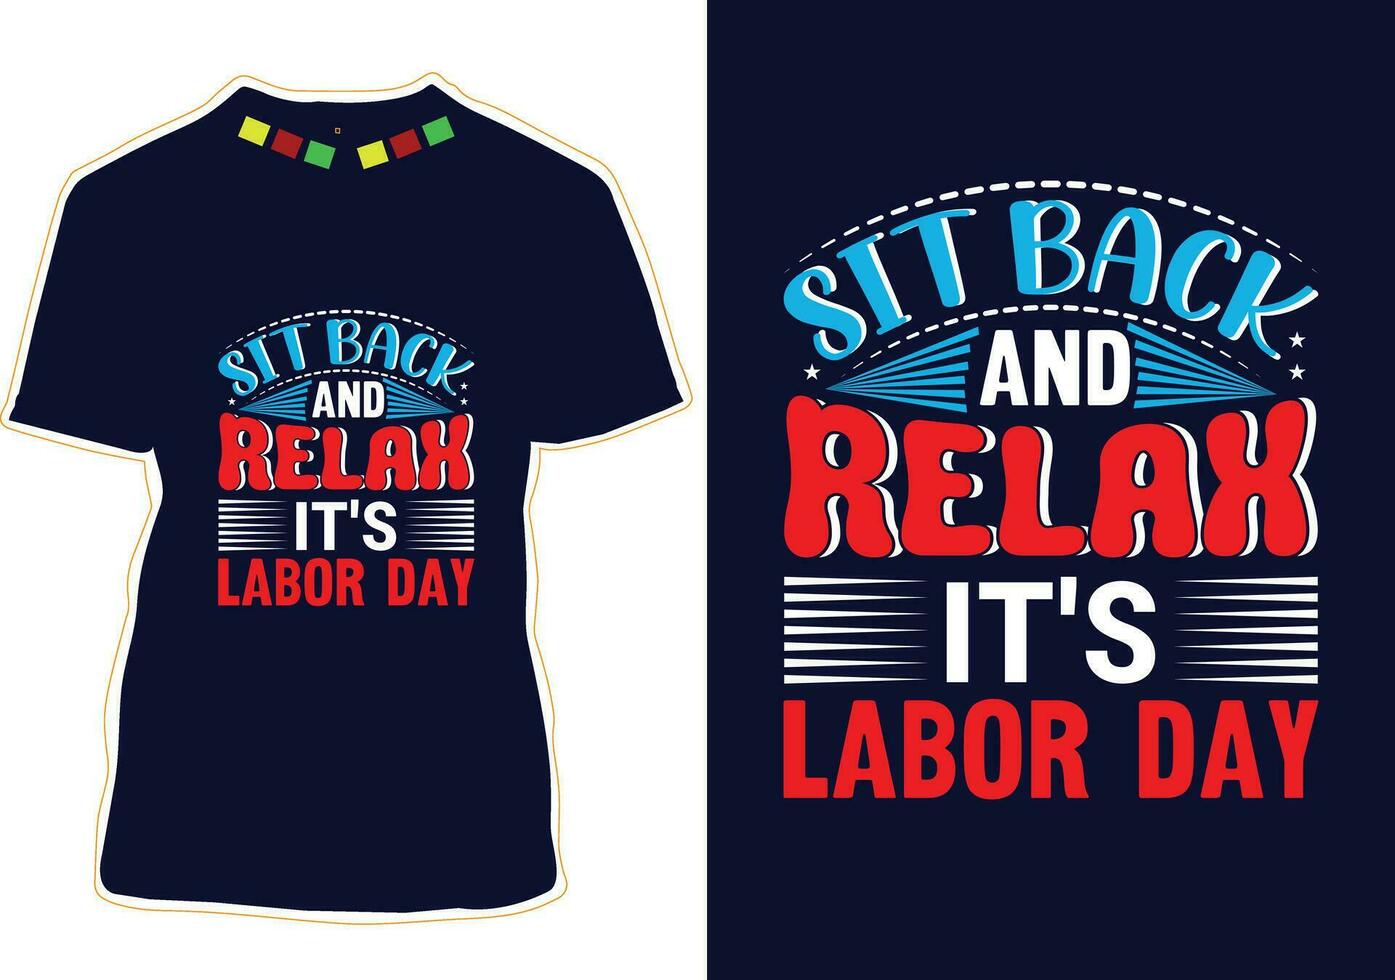 Sit Back And Relax It's Labor Day T-shirt Design vector